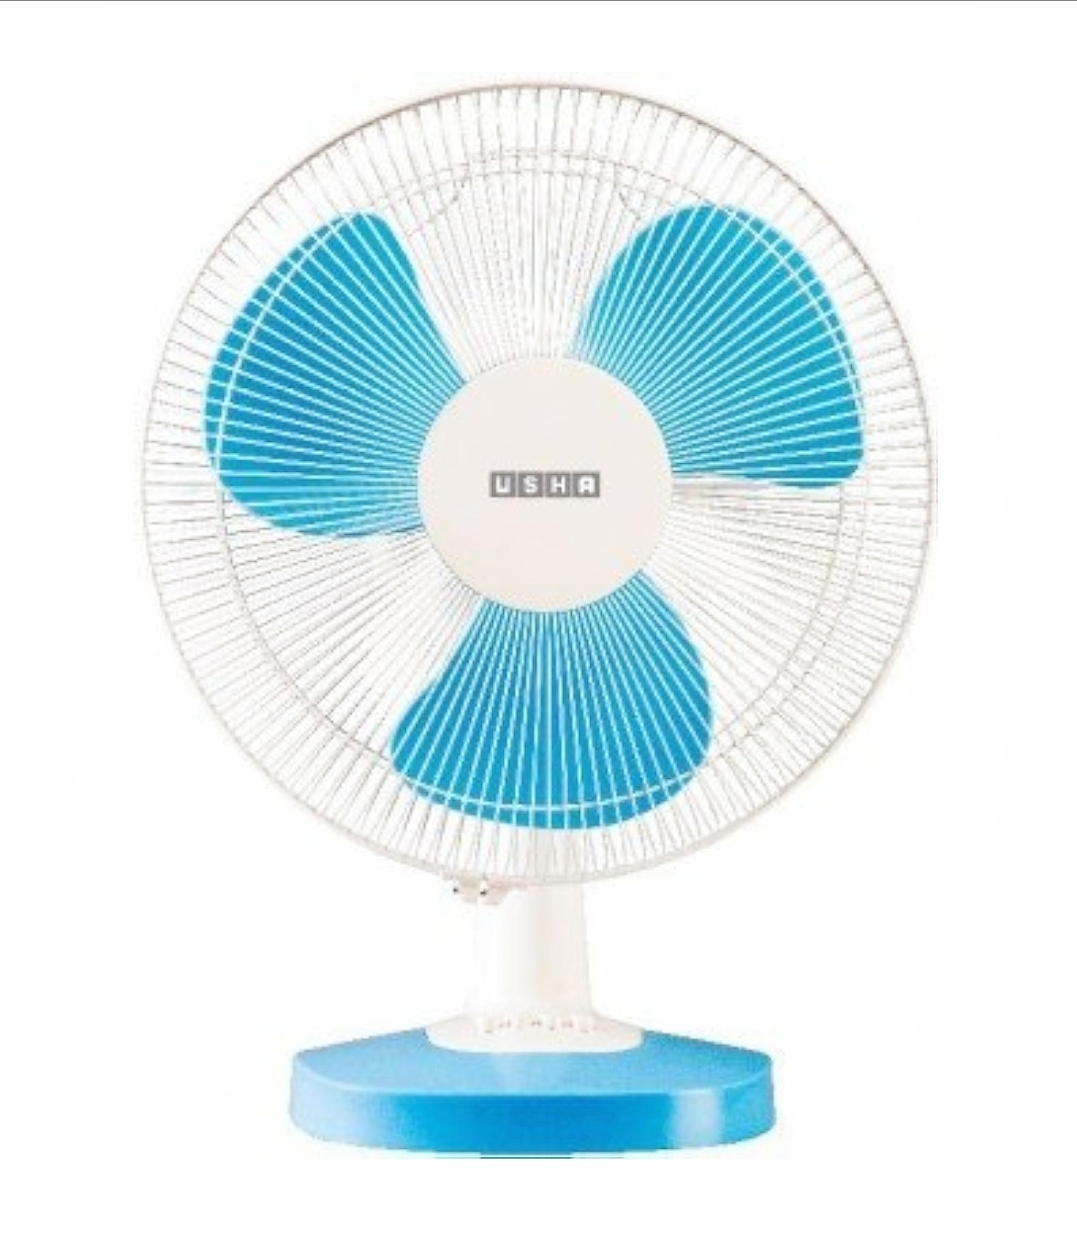 USHA Mist Air Duos Table Fan (Blue), Pack of 1